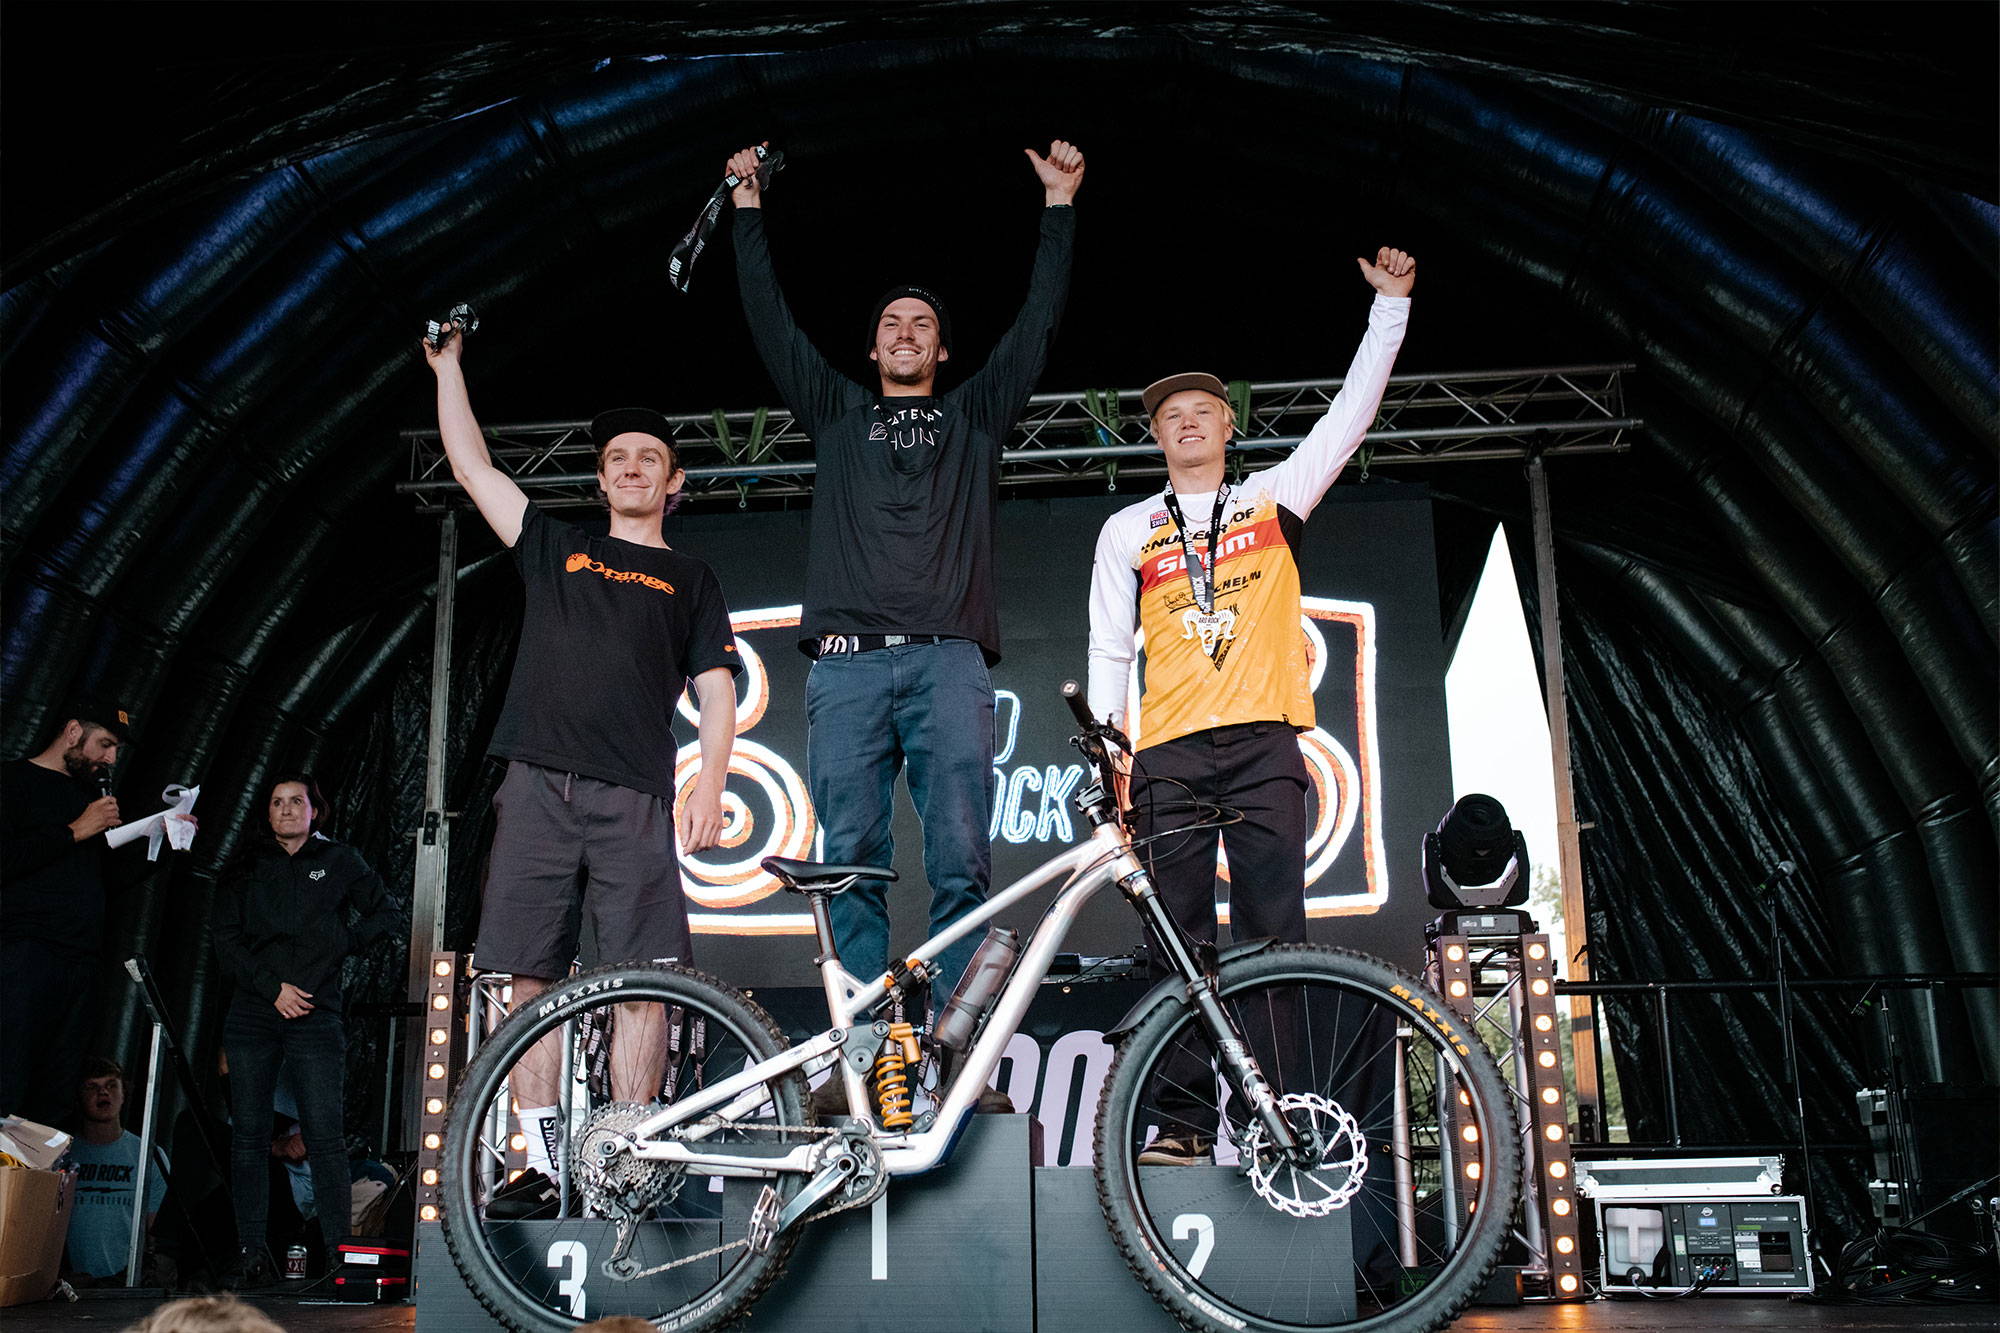 Privateer racer on a podium with the new Gen 2 bike